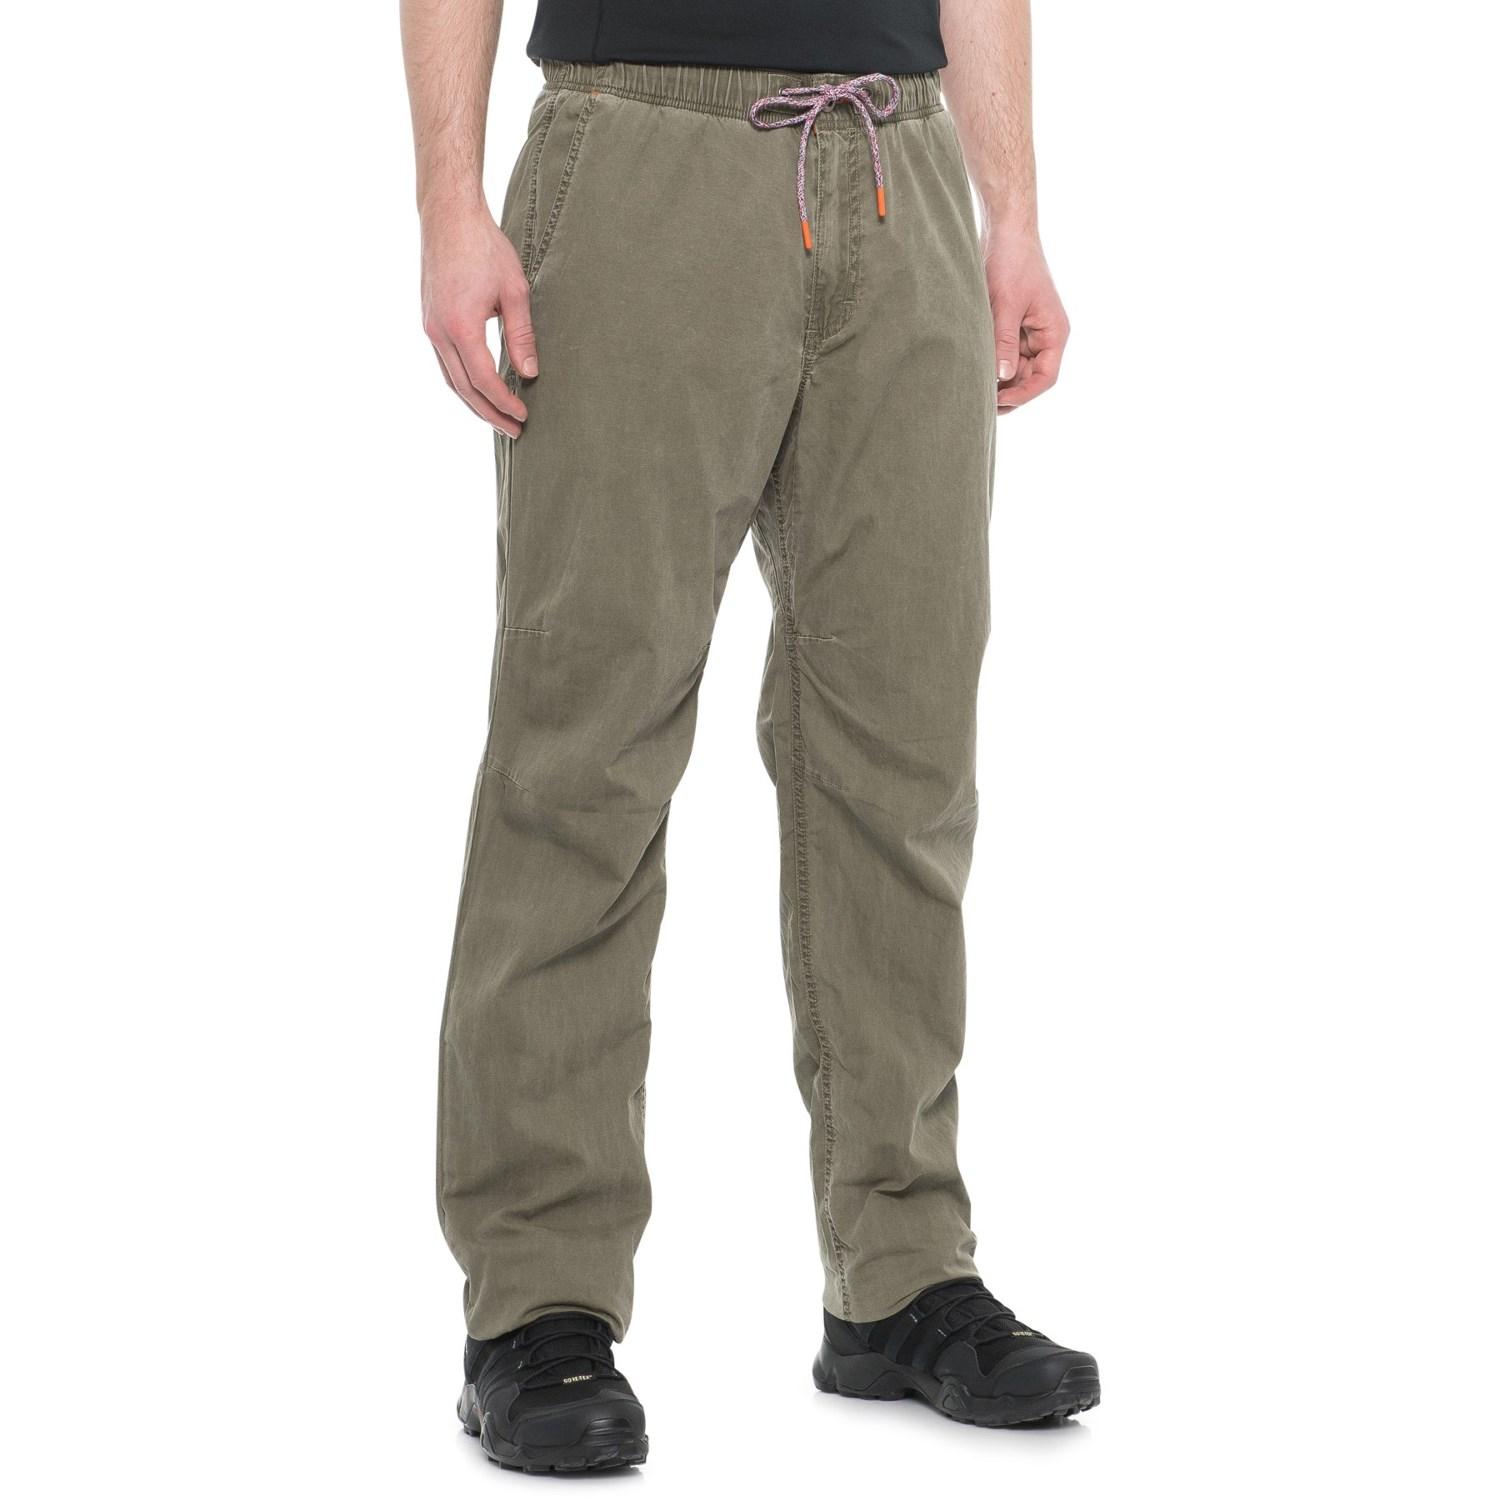 Gramicci All-access Climbing Pants in Green for Men - Lyst